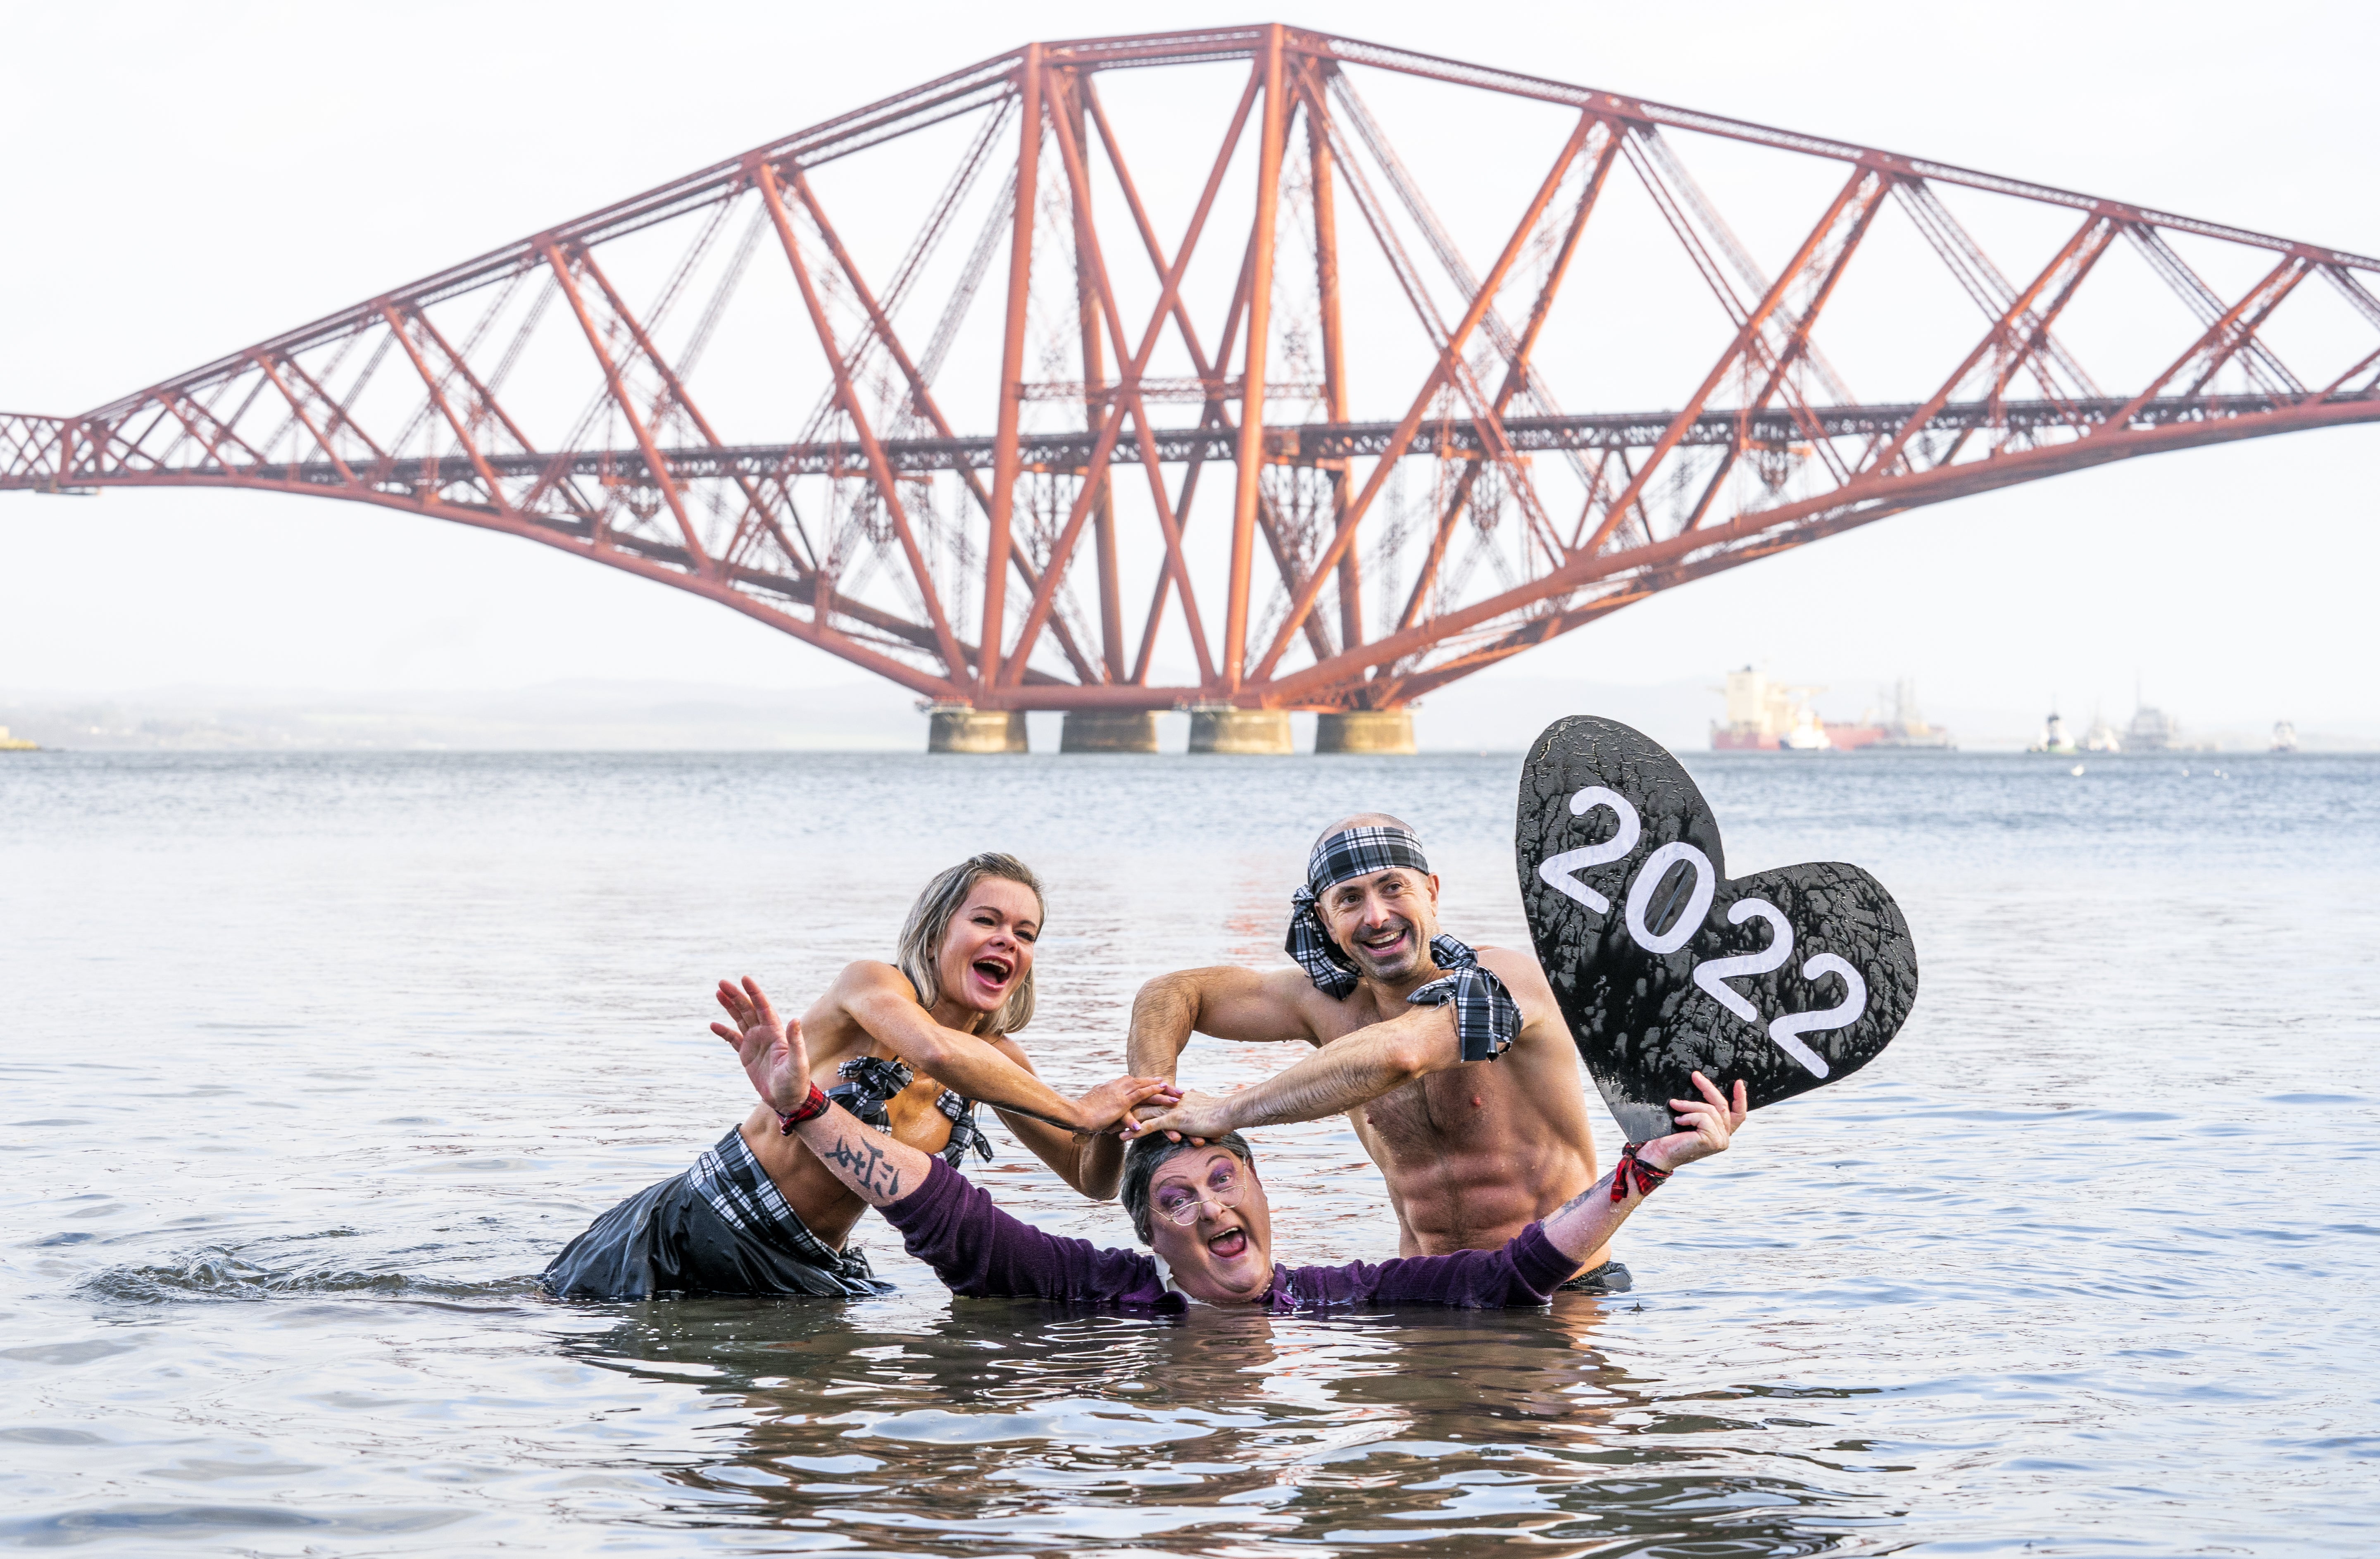 People take part in a New Year’s Day dip in front of the Forth Bridge at South Queensferry, Edinburgh (Jane Barlow/PA)